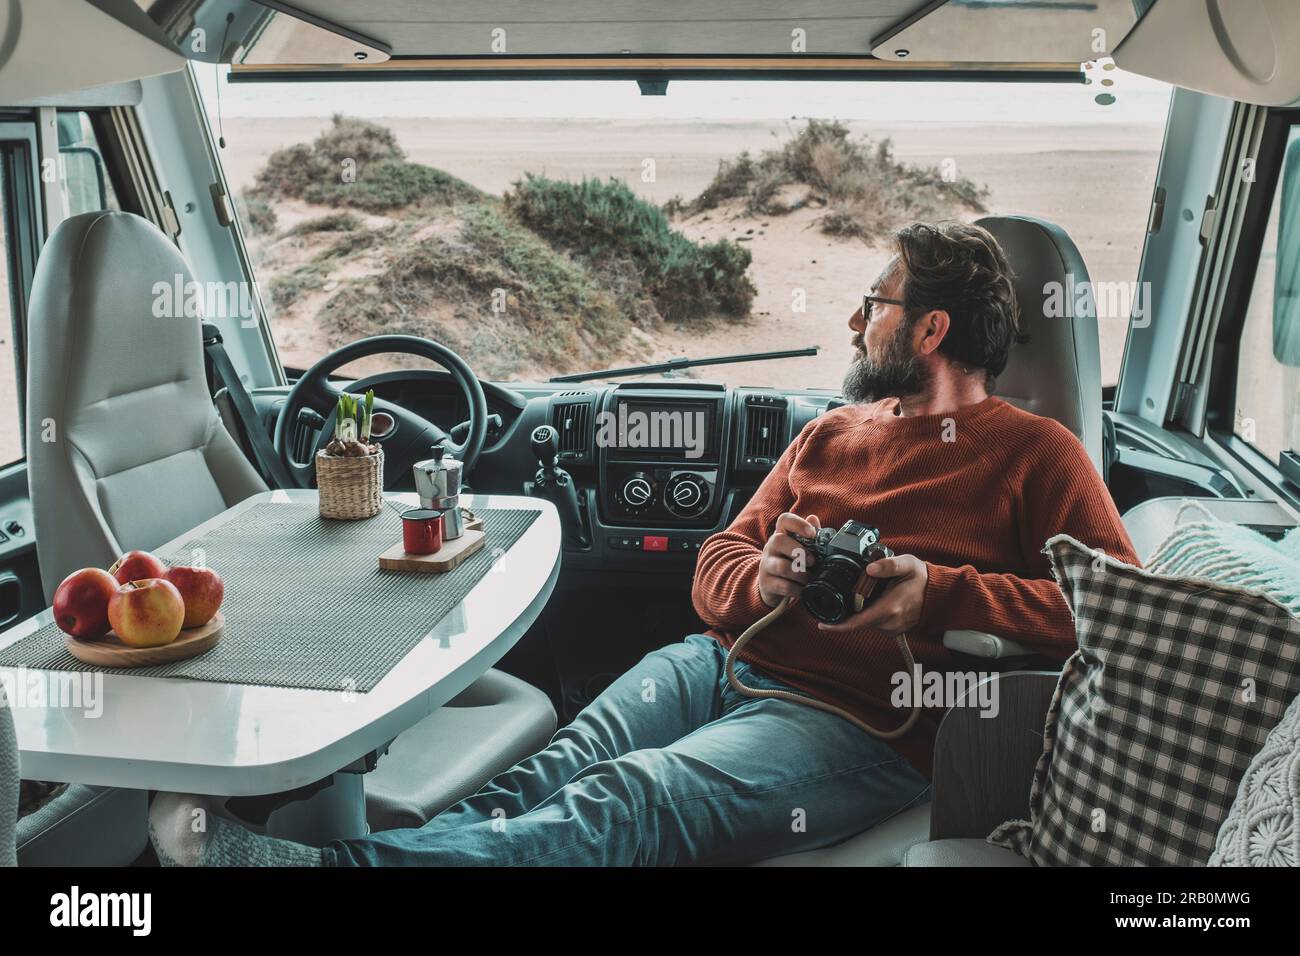 Travel lifestyle and vanlife. Tourist enjoy and relax on vacation sitting inside motorhome vehicle and using photo camera. Traveler photographer. People and adventure. Parking at the beach. Camper van Stock Photo